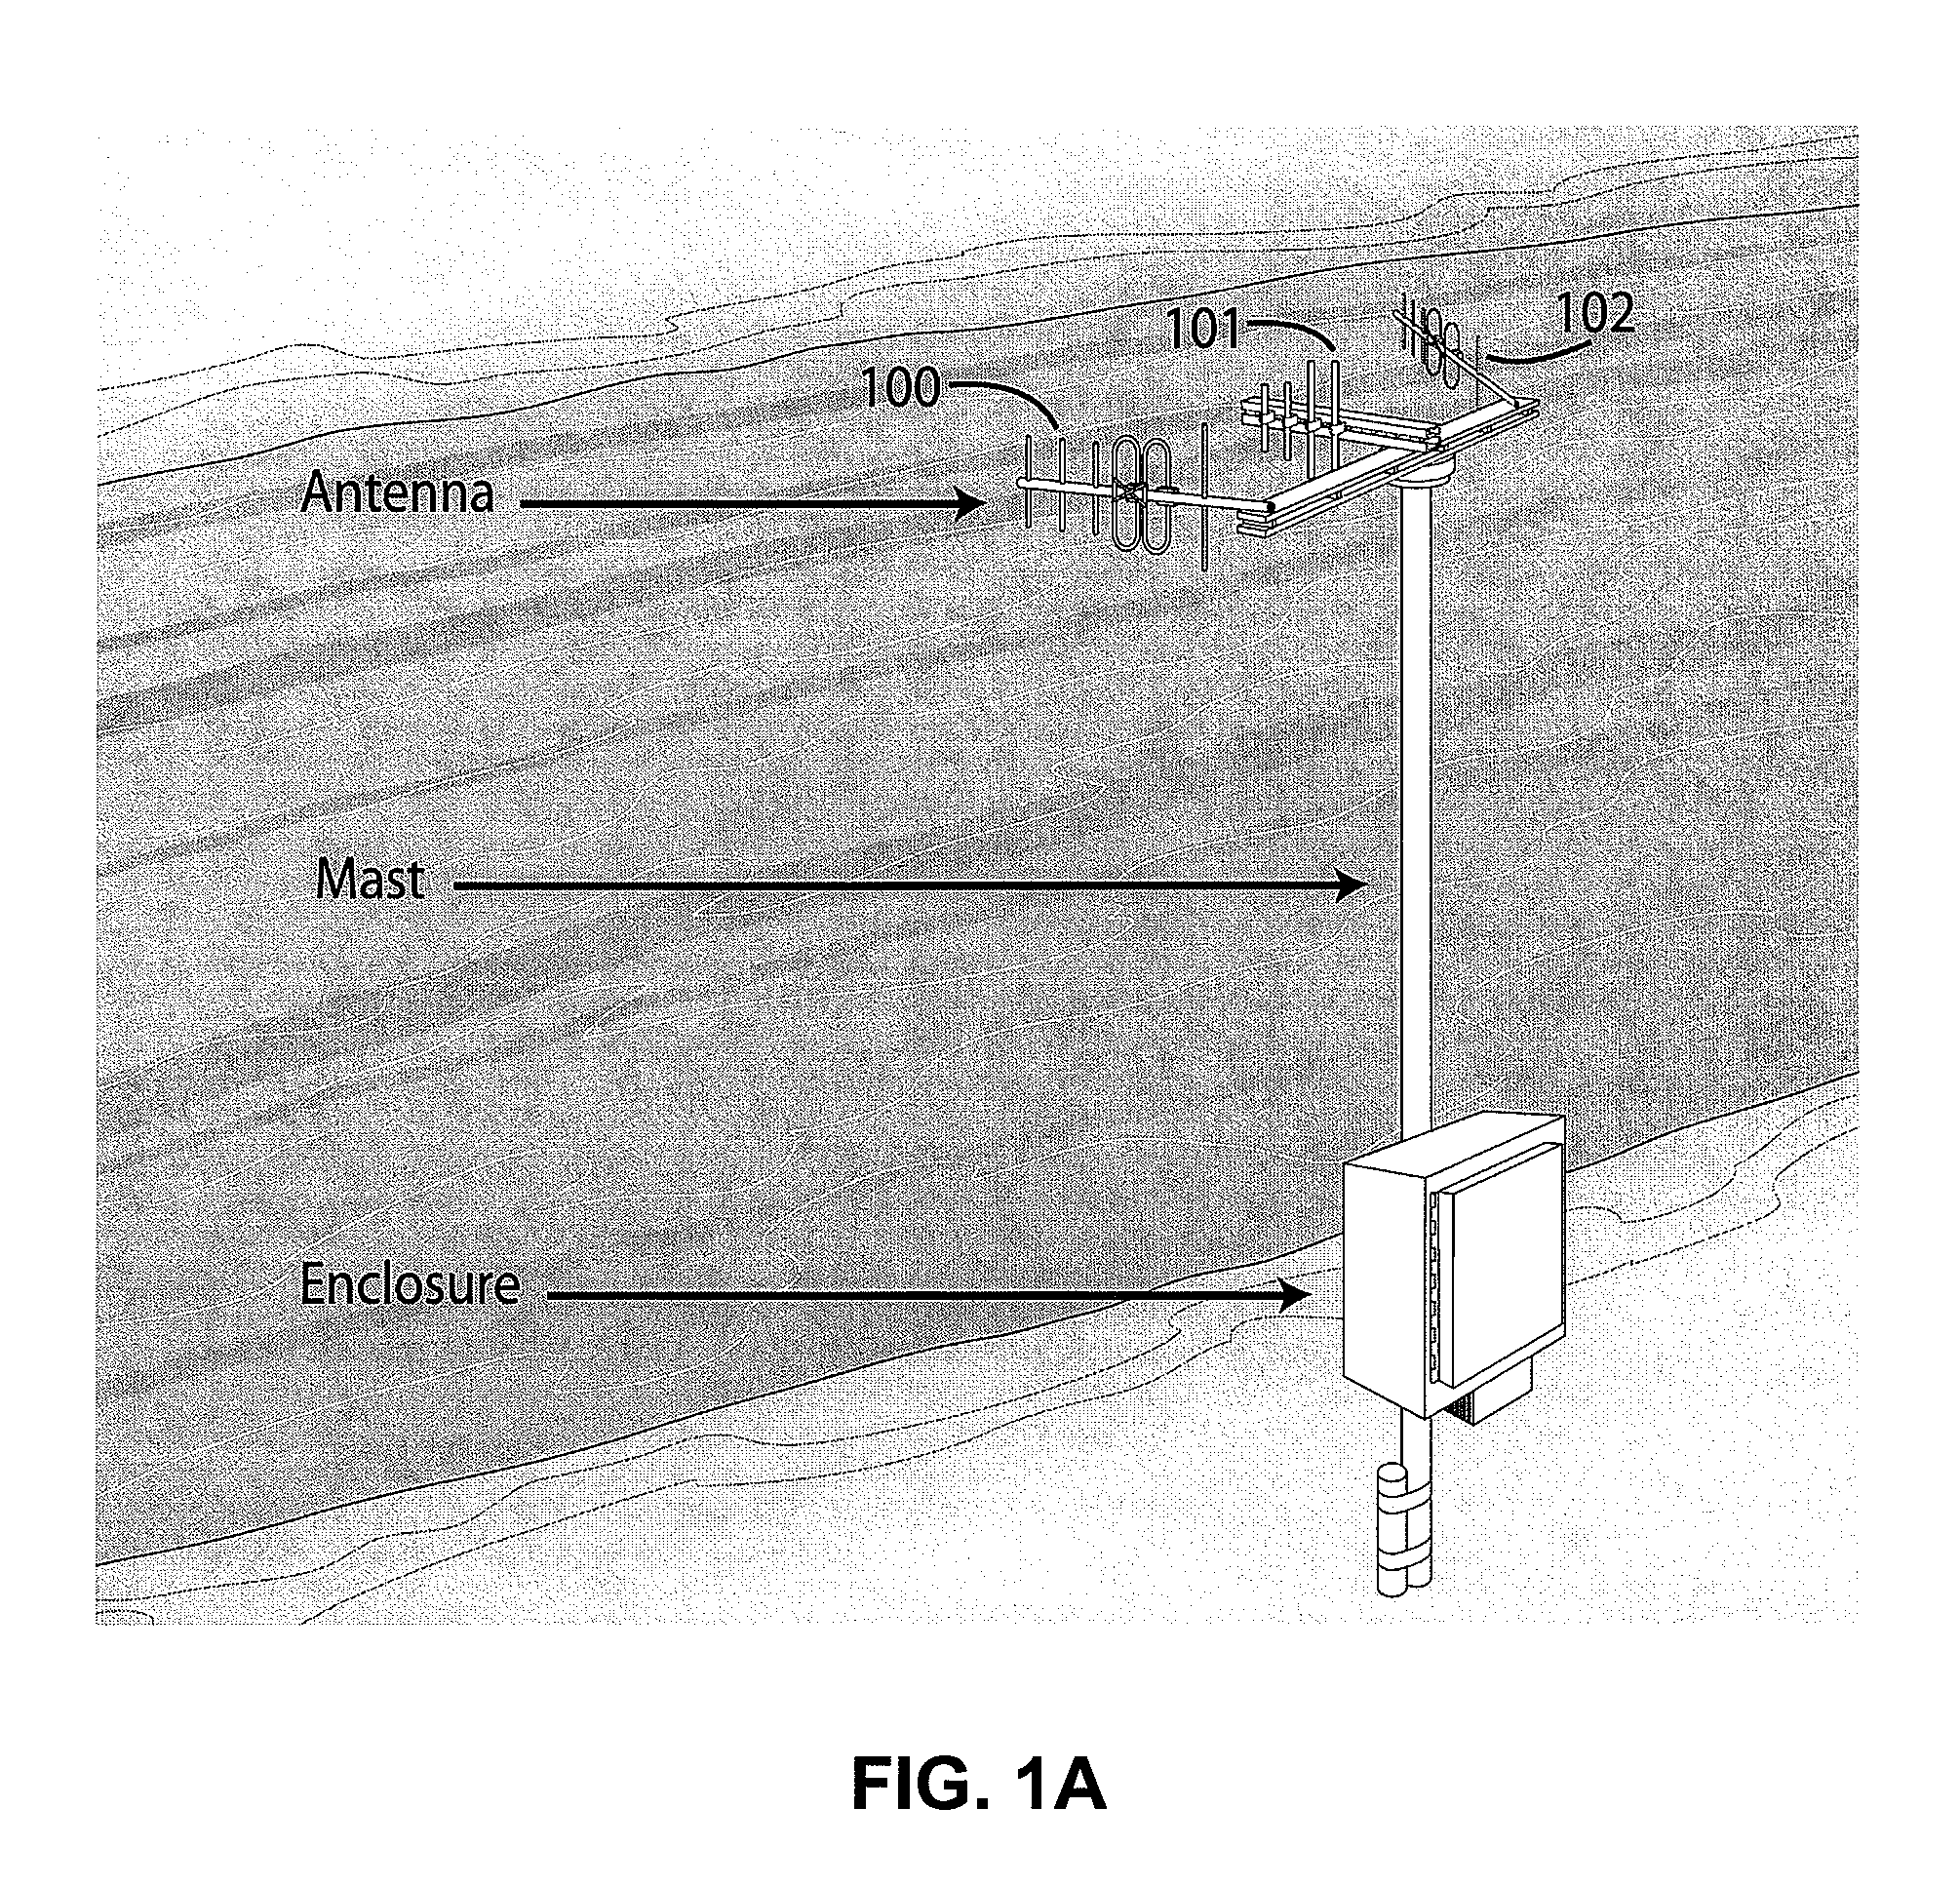 Systems and methods for monitoring river flow parameters using a VHF/UHF radar station